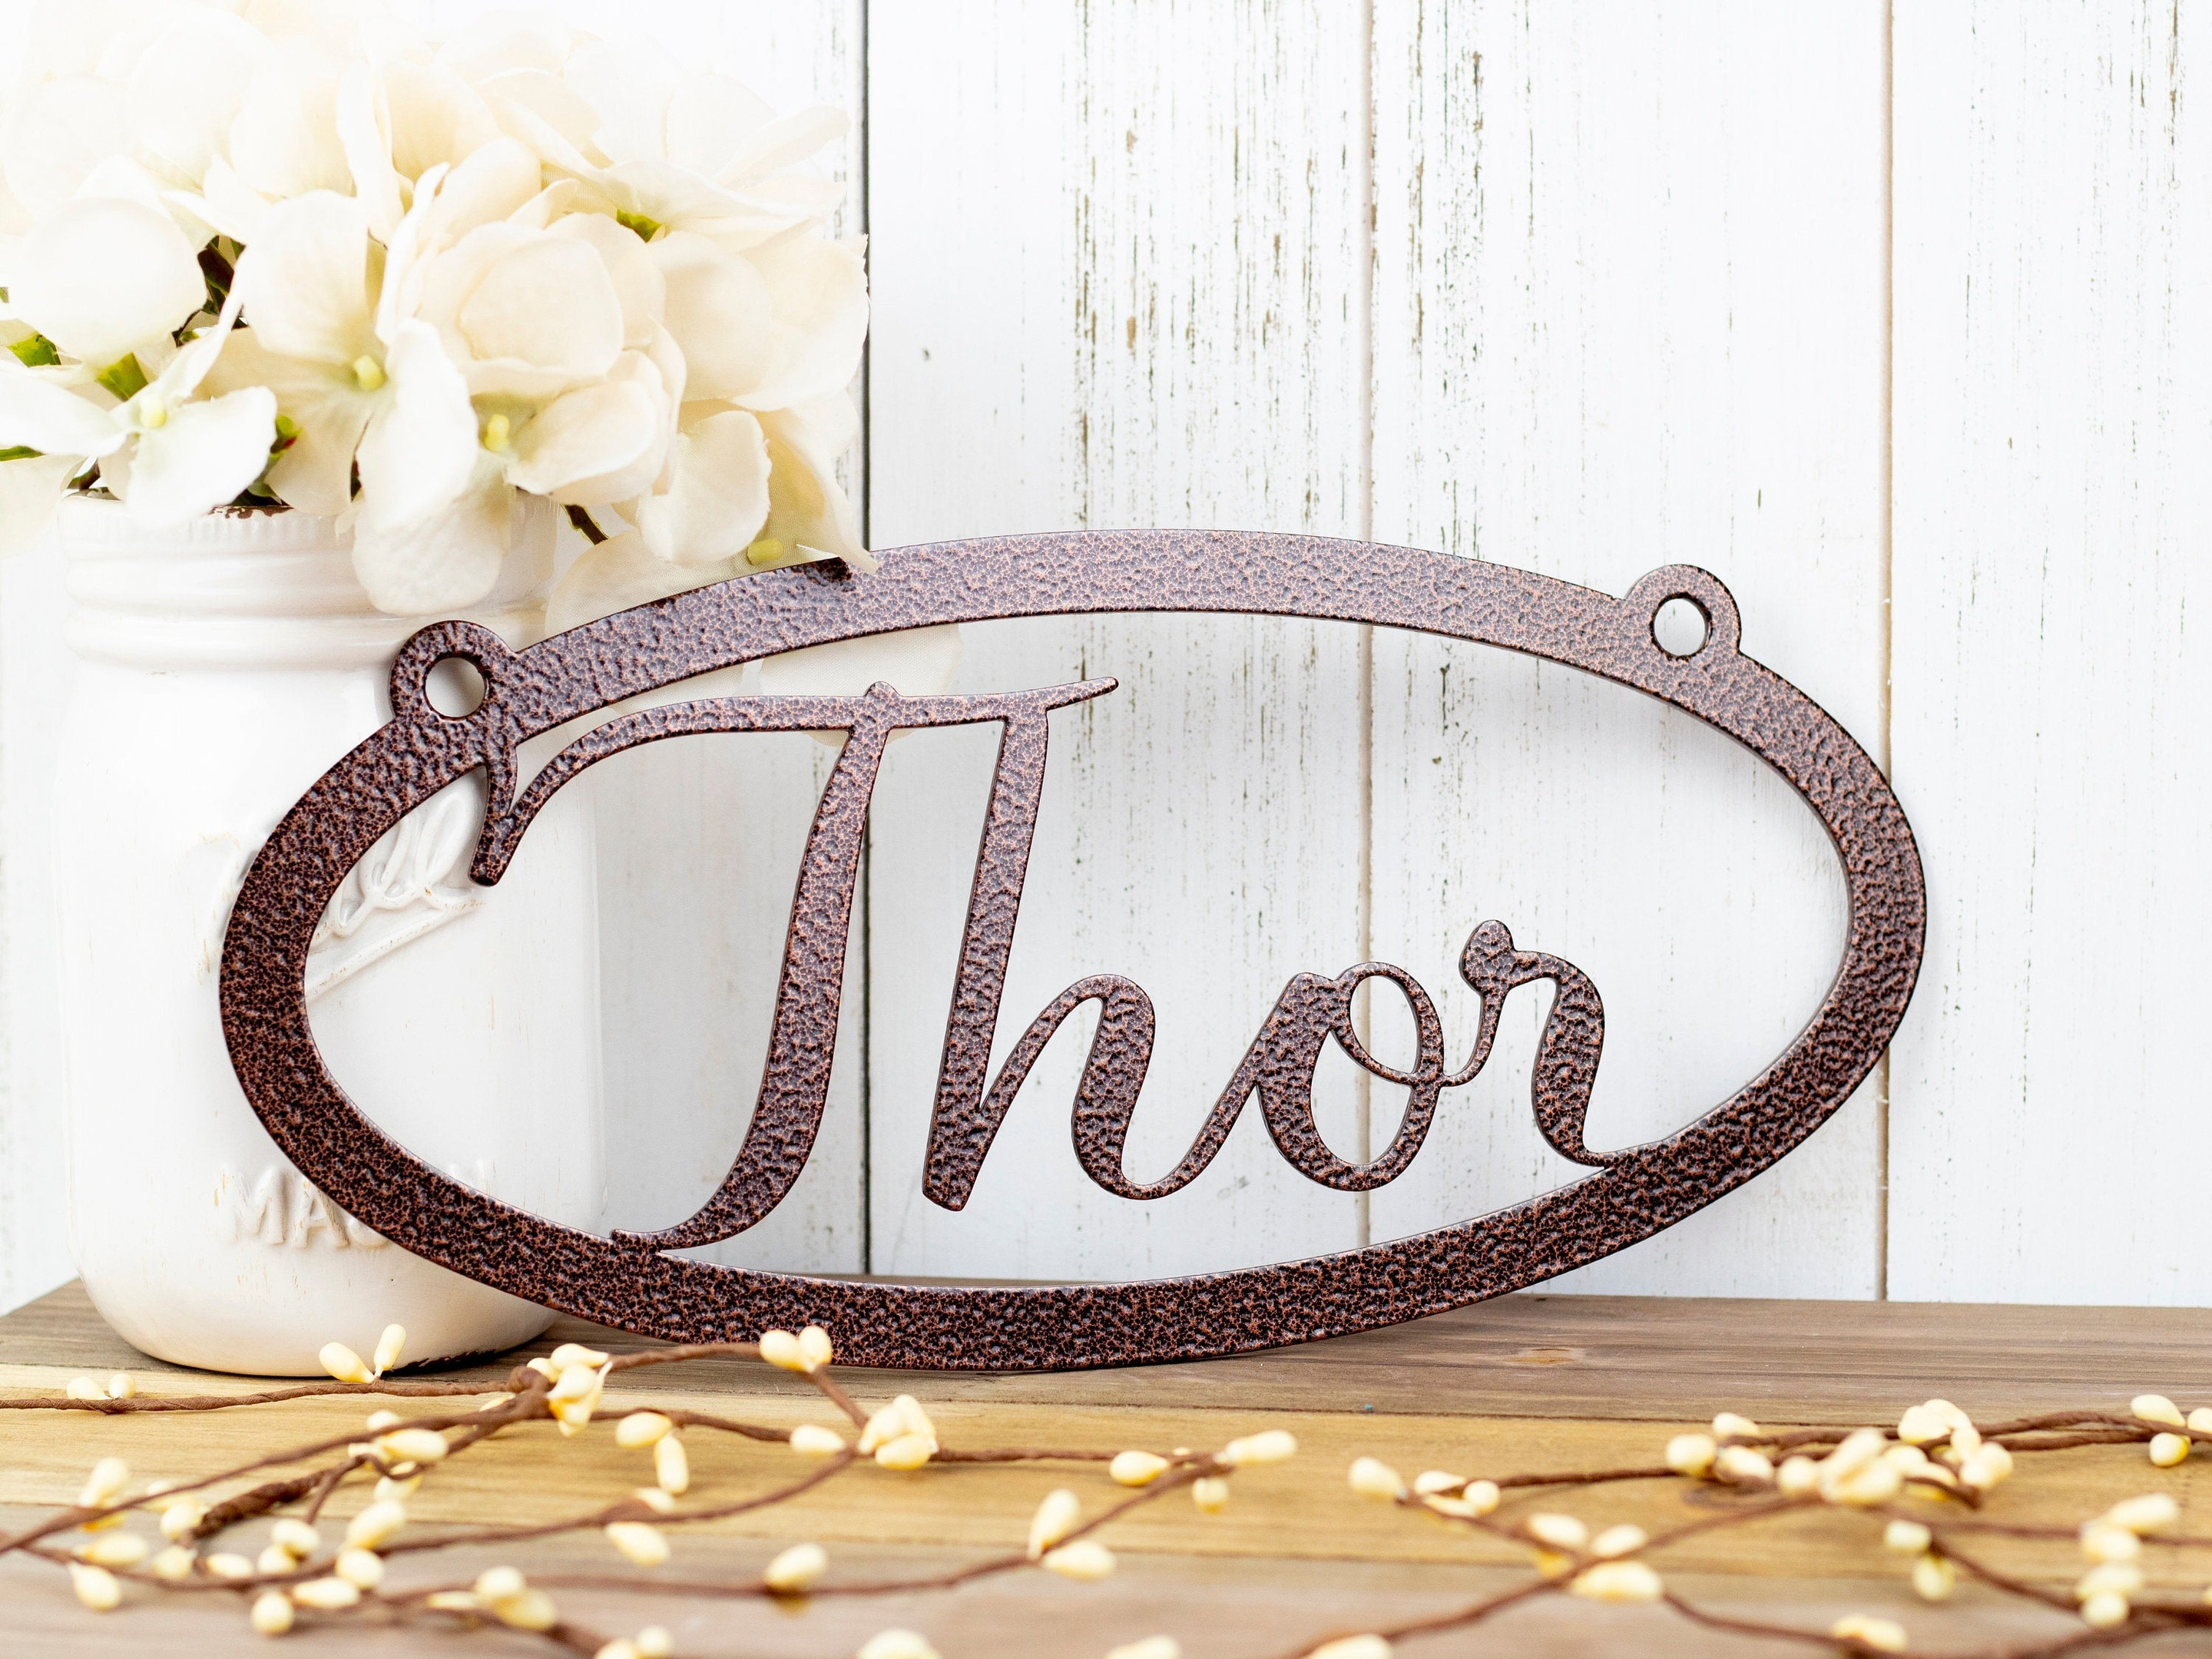 Custom Name Sign, Metal Name Sign, Personalized Sign, Metal Wall Art, Name Plaque, Custom Sign, Metal Wall Decor, Laser Cut Metal Signs Custom Gift Ideas 14x14IN